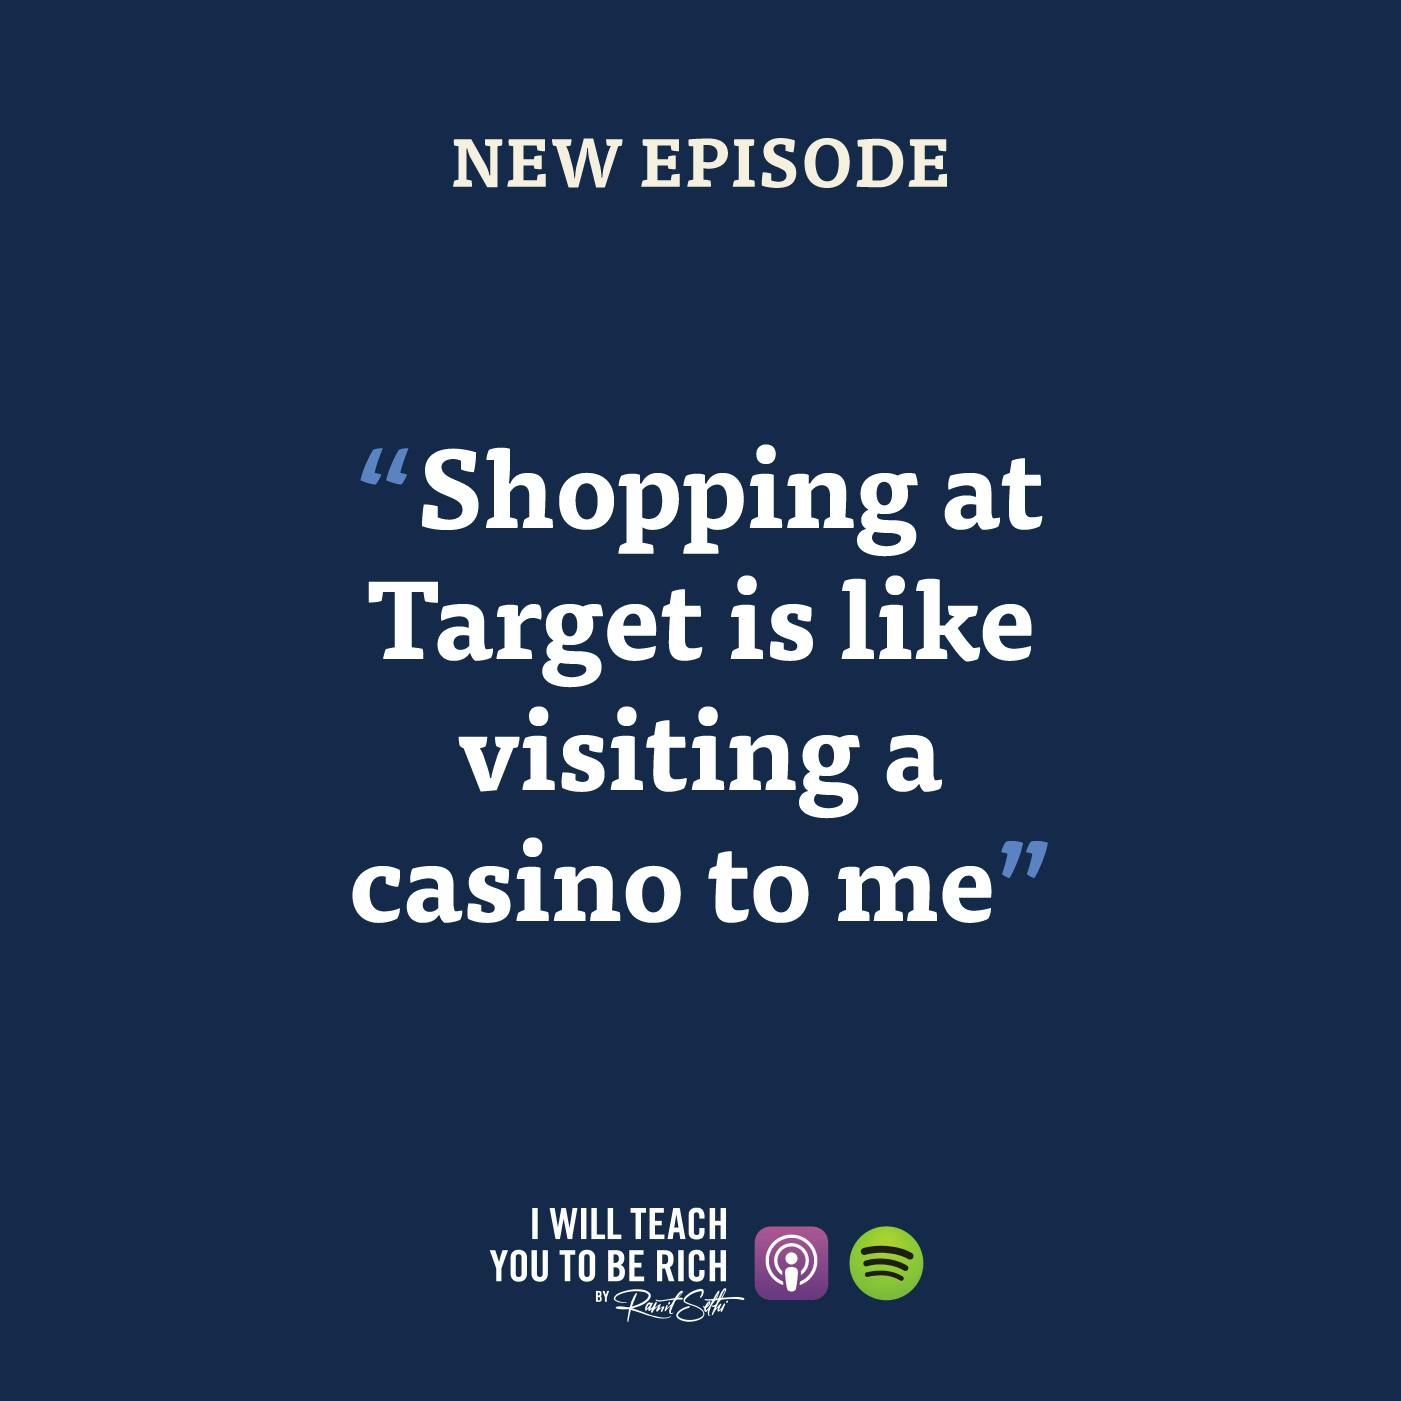 31. “Shopping at Target is like visiting a casino to me”